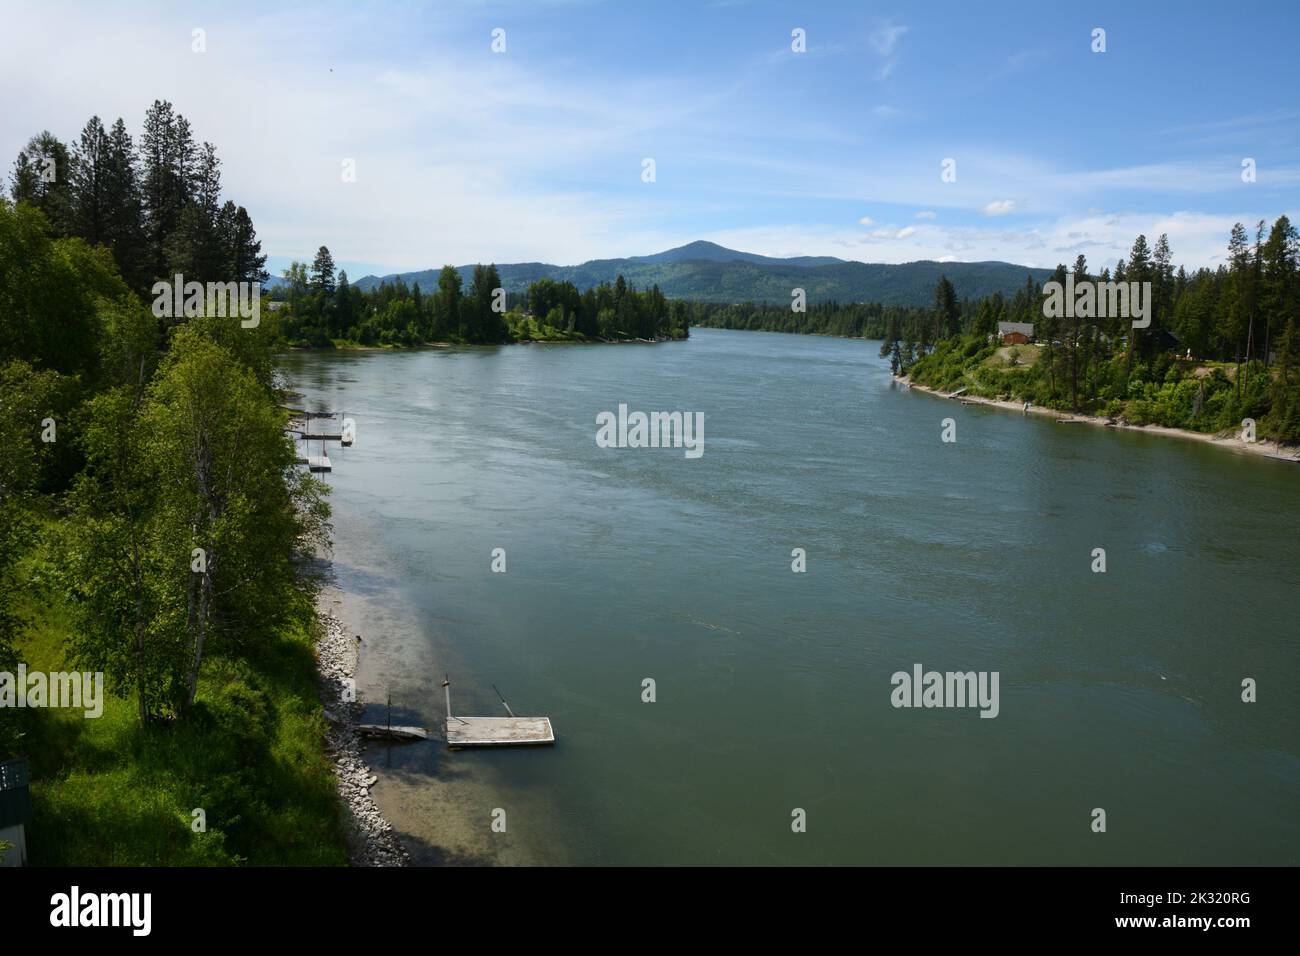 The Pend-Oreille River, a tributary of the Columbia, running through the Colville National Forest near Ione, in northeastern Washington State, USA. Stock Photo